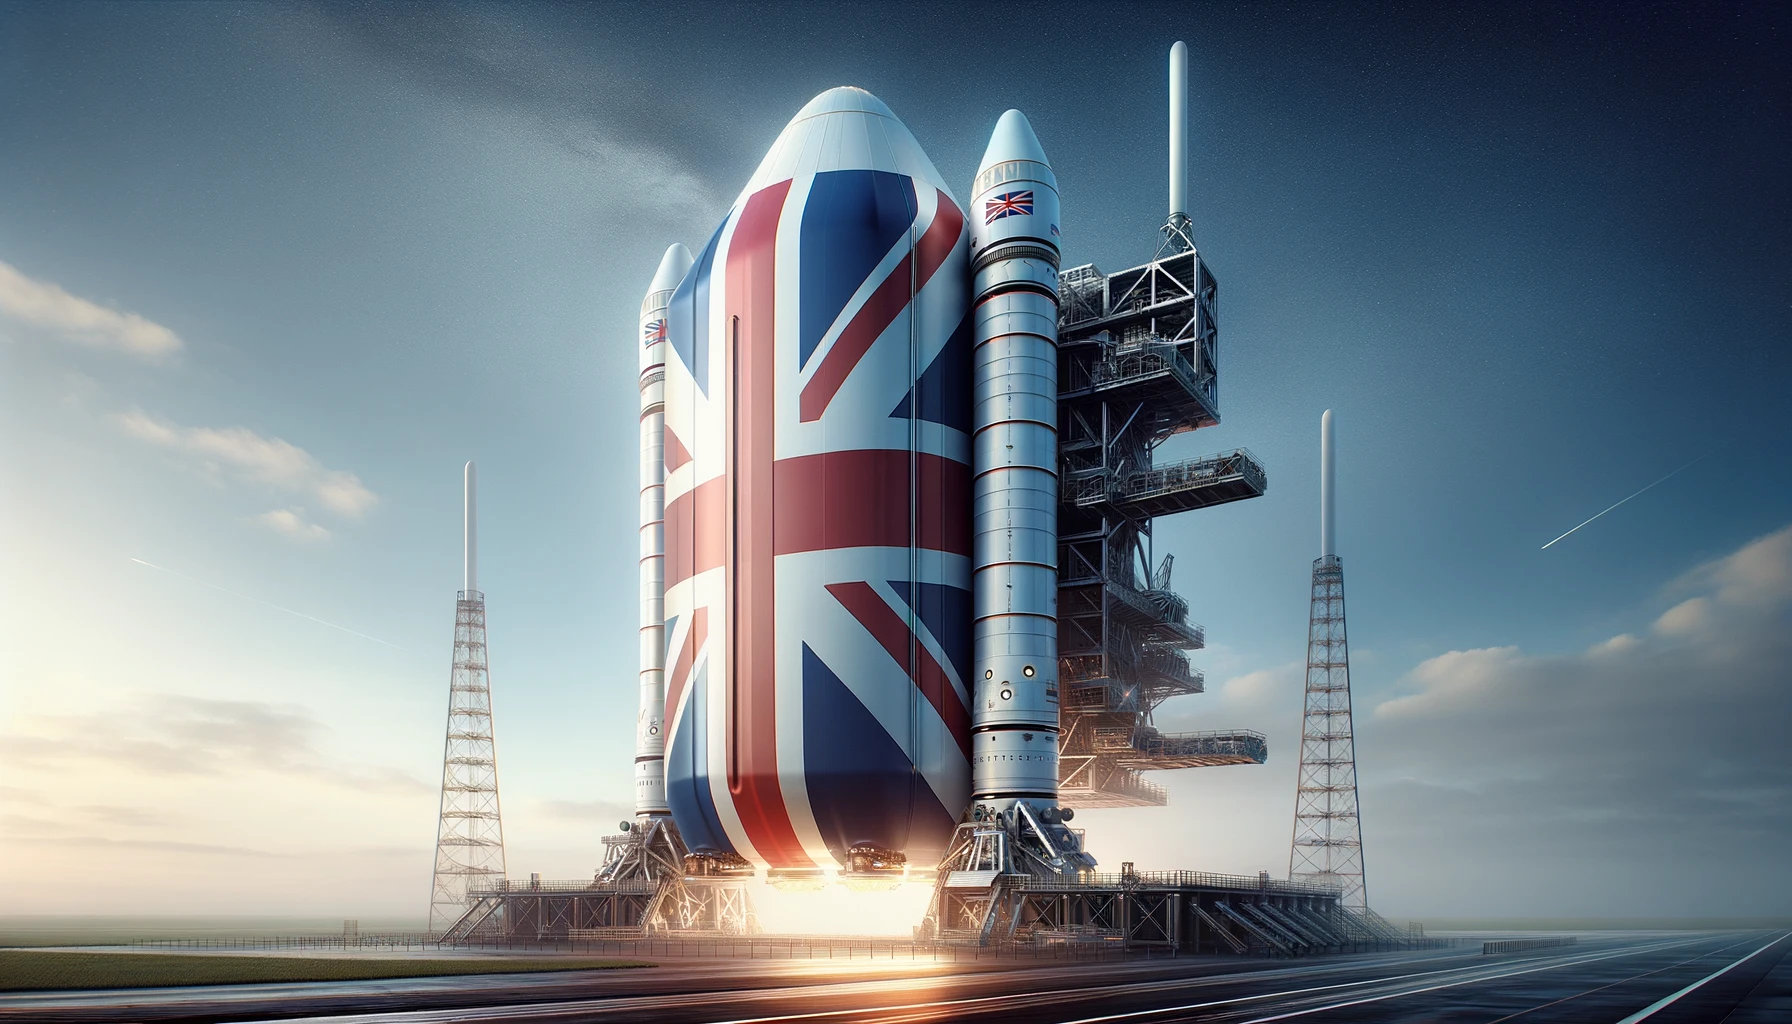 A series of representations showcasing a modern spacecraft, prominently featuring the Union Jack, stationed on a launch pad under a pristine blue sky. Each image evokes a sense of anticipation and national pride as the UK prepares for its inaugural all-British space mission